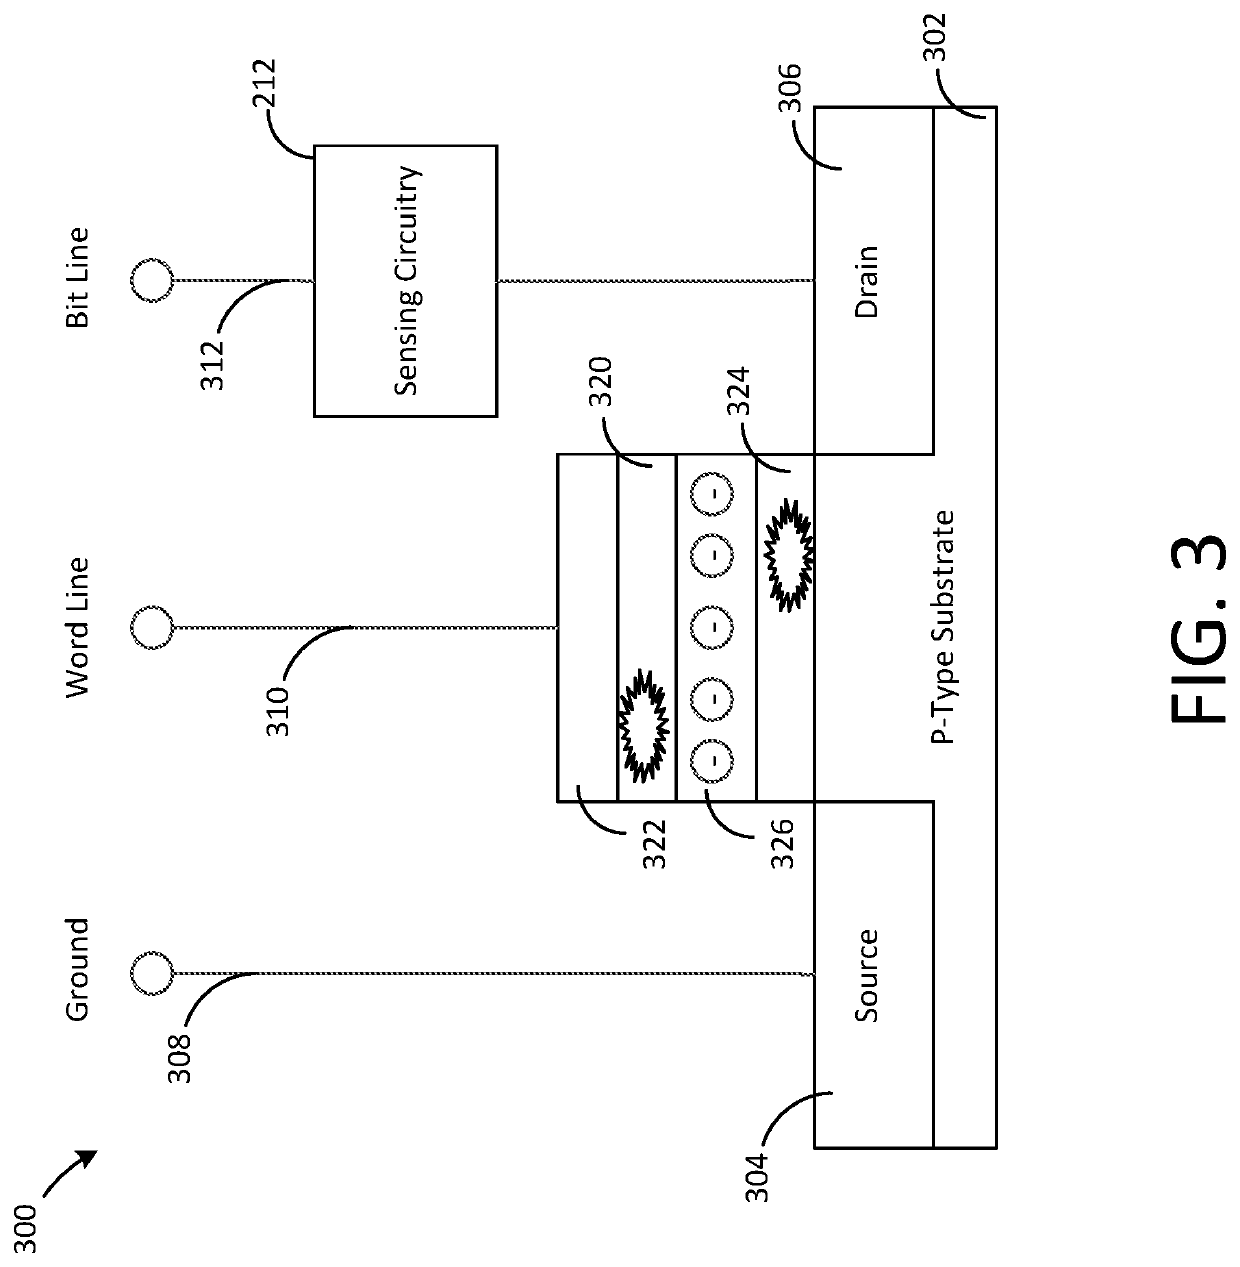 Systems and methods for sensing radiation using flash memory